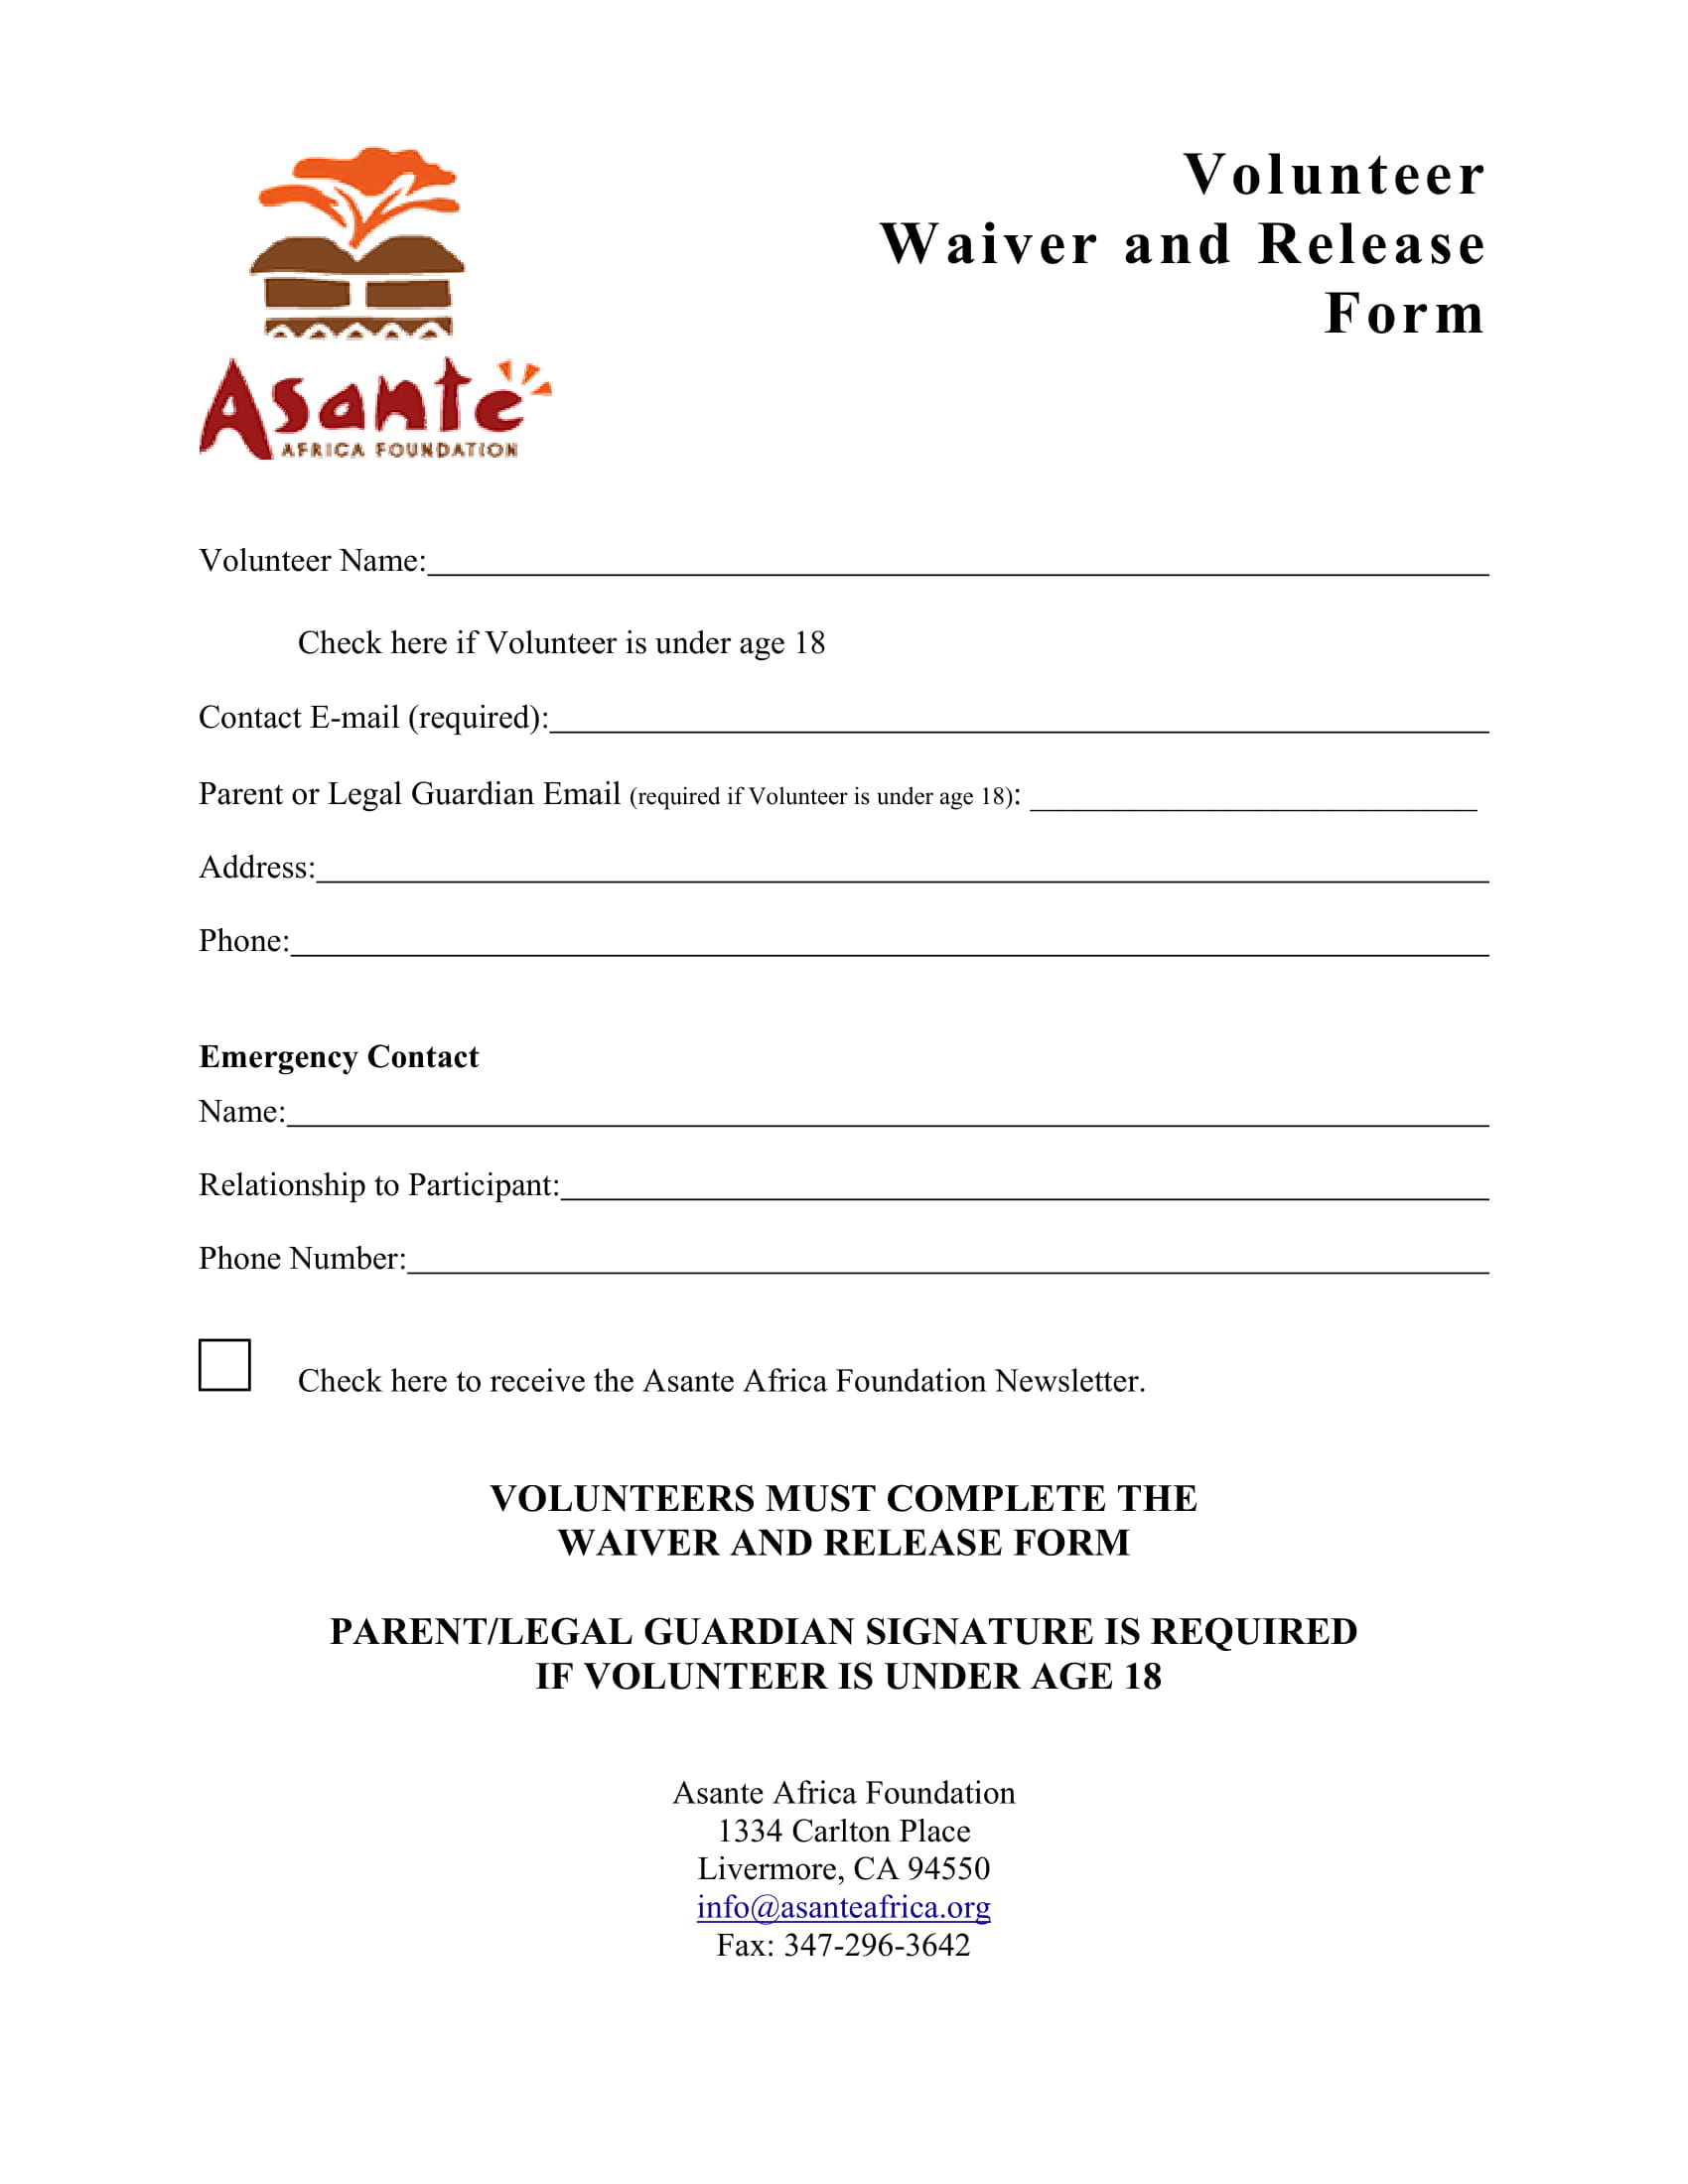 volunteer waiver and release form 1